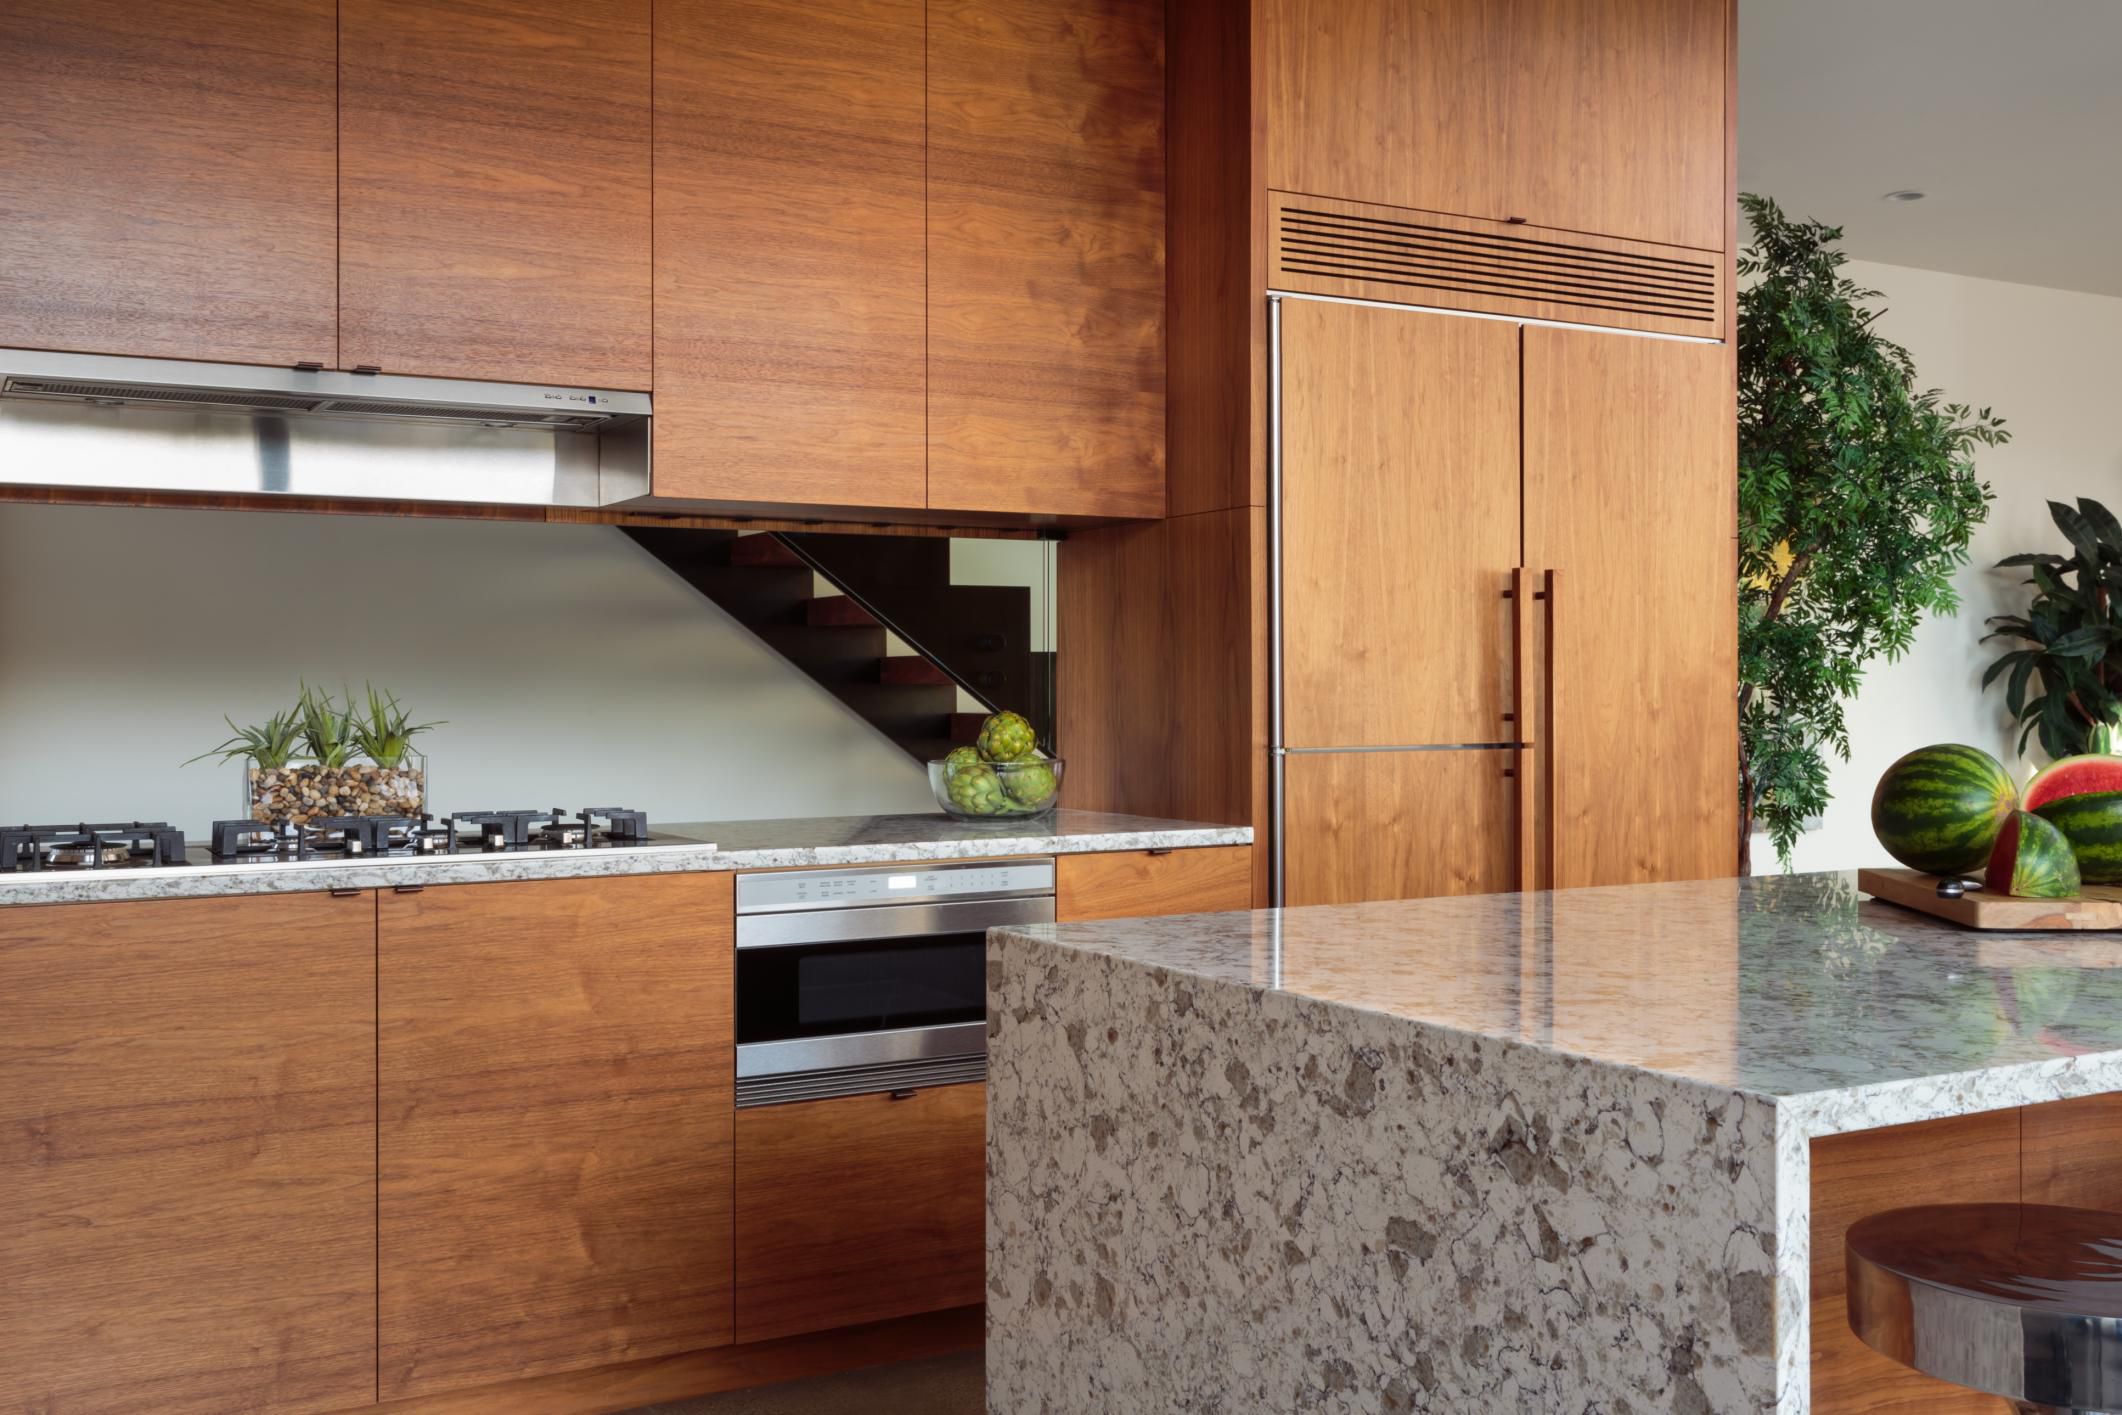 Top 10 Materials For Kitchen Countertops